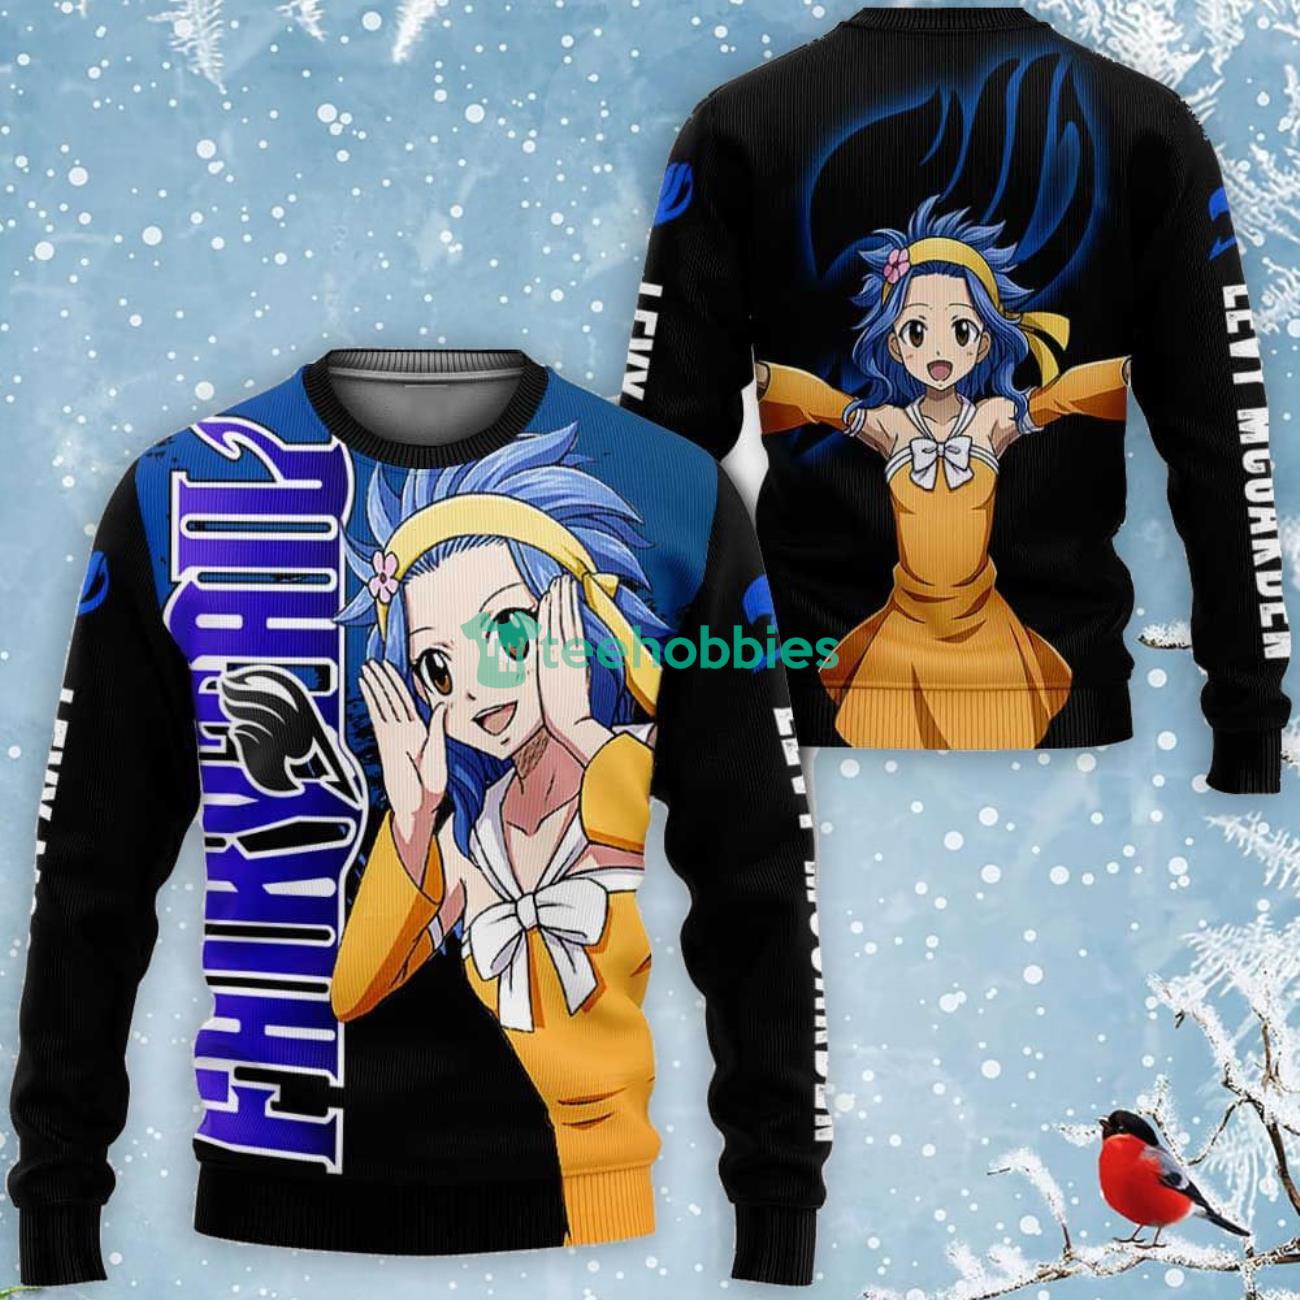 Levy McGarden All Over Printed 3D Shirt Fairy Tail Anime Fans Product Photo 2 Product photo 2